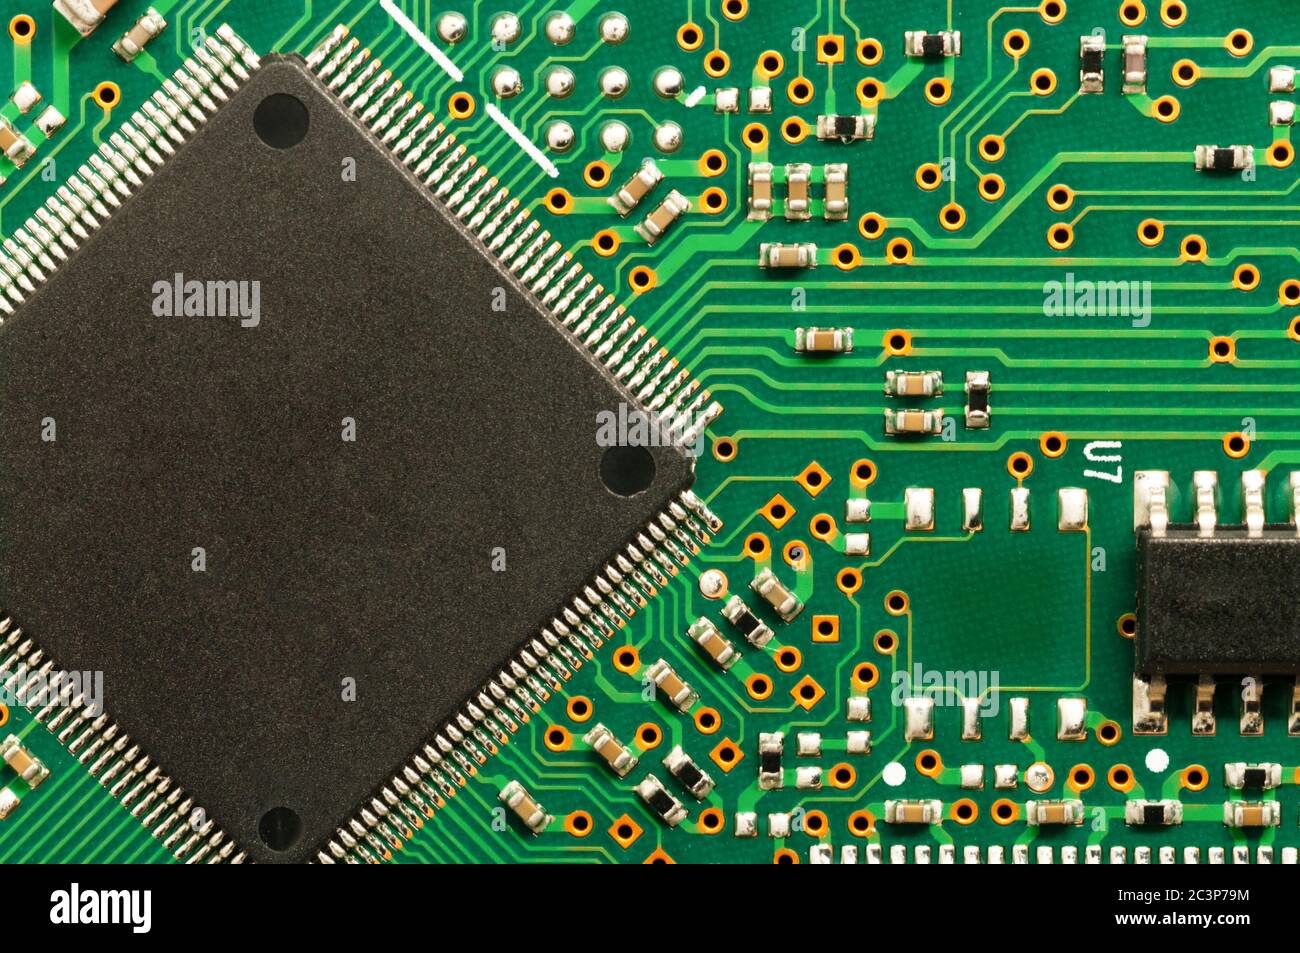 Close-up of electronic circuit board PCB with microchip, processor, integrated circuits, resistances and electronic connections. Stock Photo